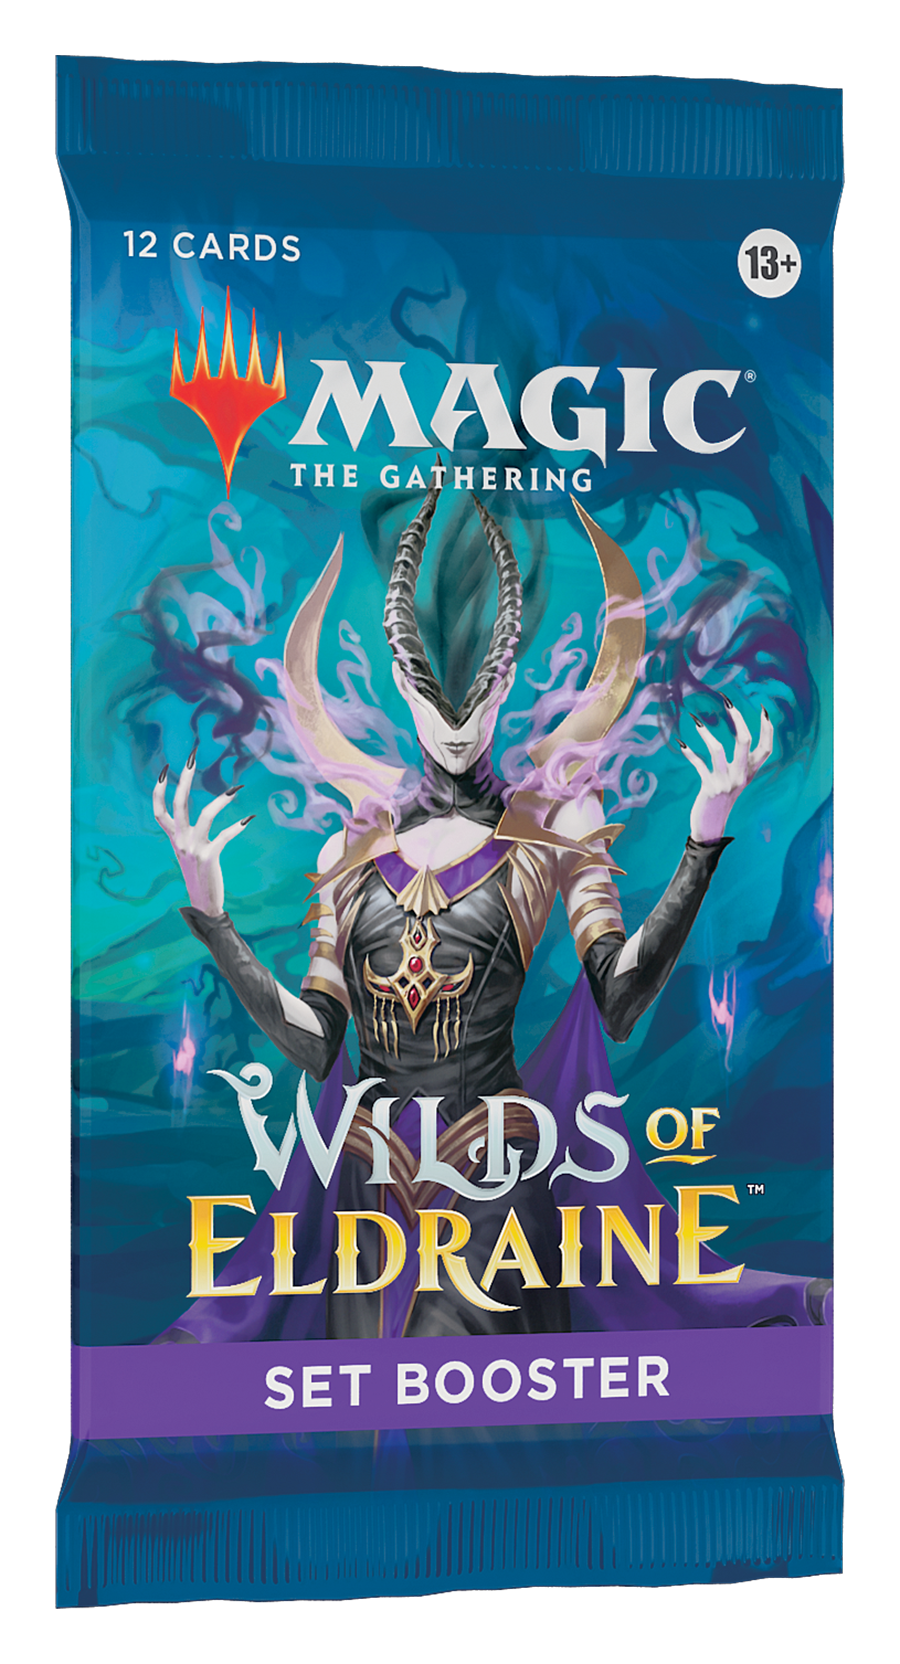 Magic the Gathering: Wilds of Eldraine Set Booster Pack product image.